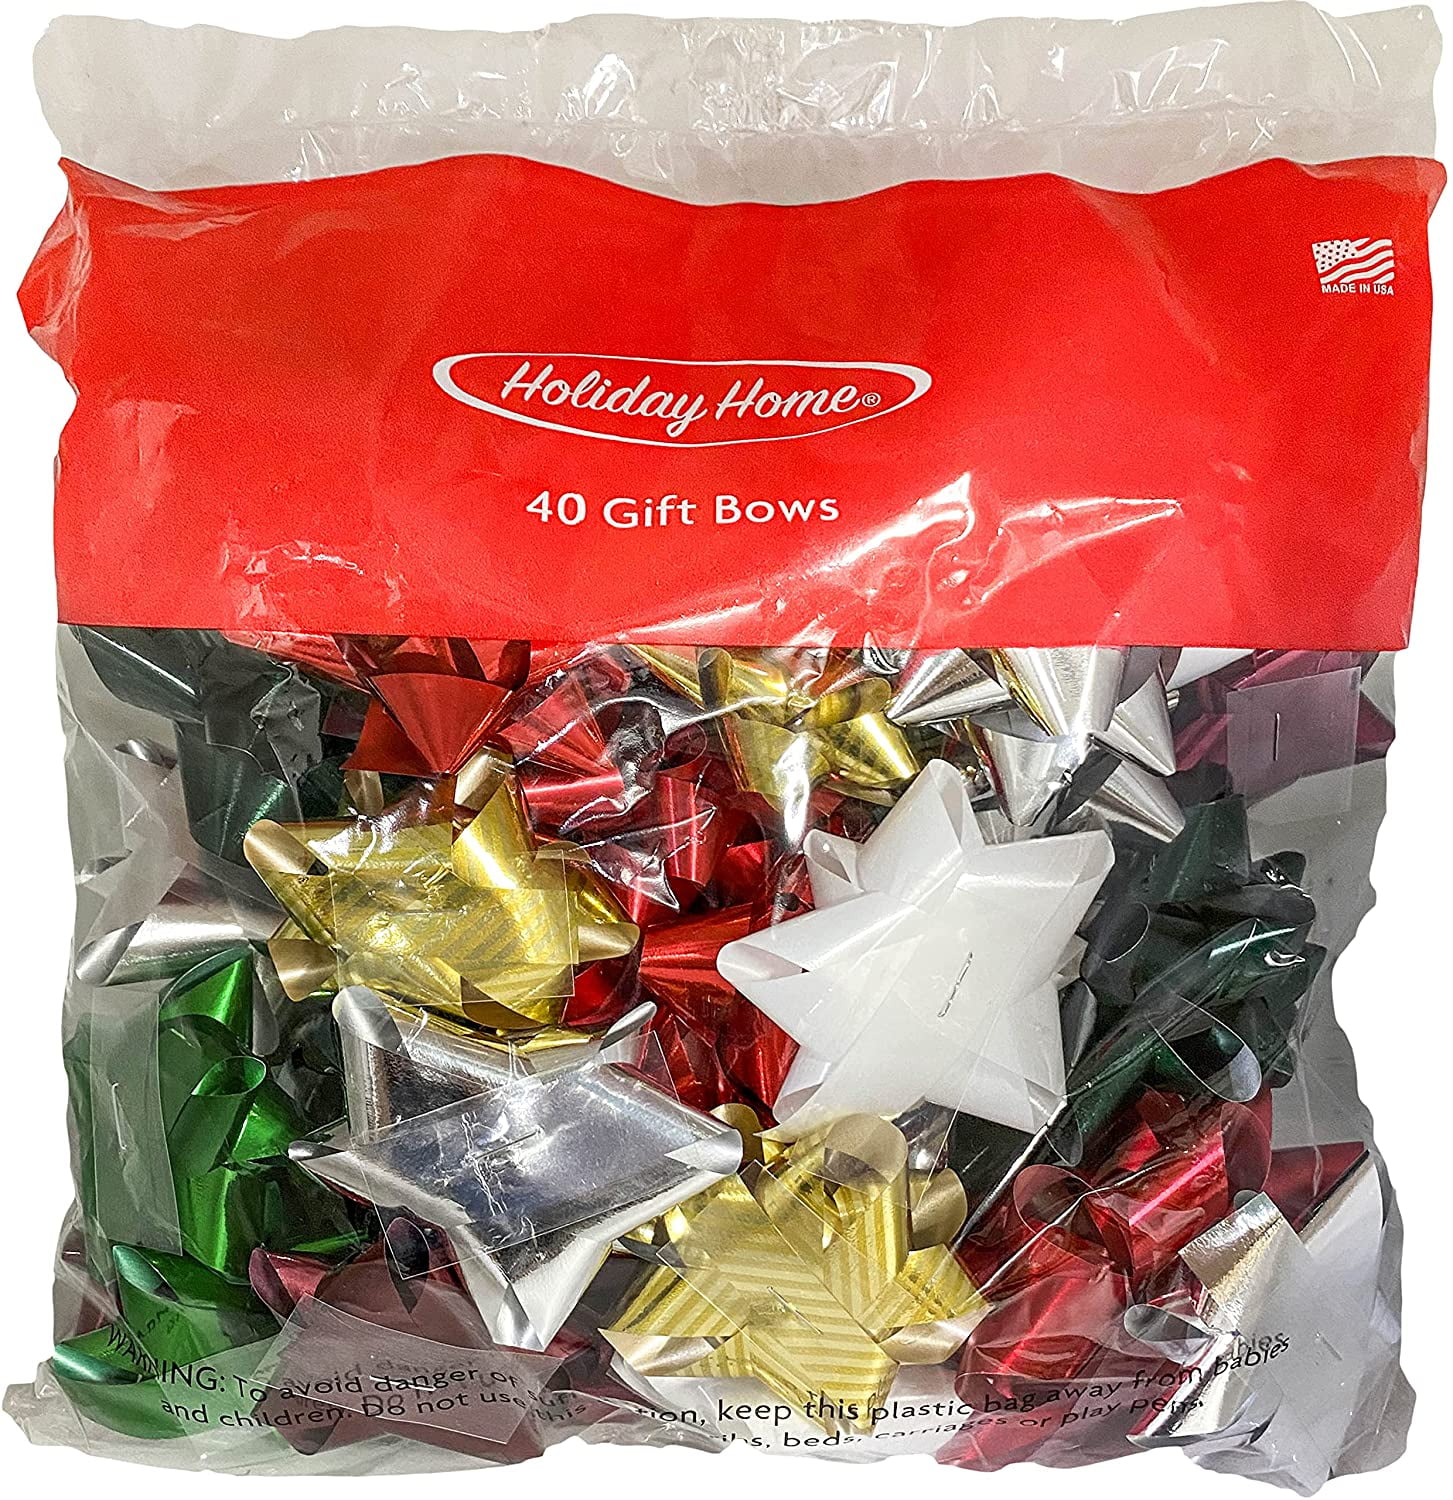 2 BAGS 36 GIFT BOWS PREMIUM ASSORTED PEEL & STICK MULTI-COLOR 72 TOTAL BRAND NEW 